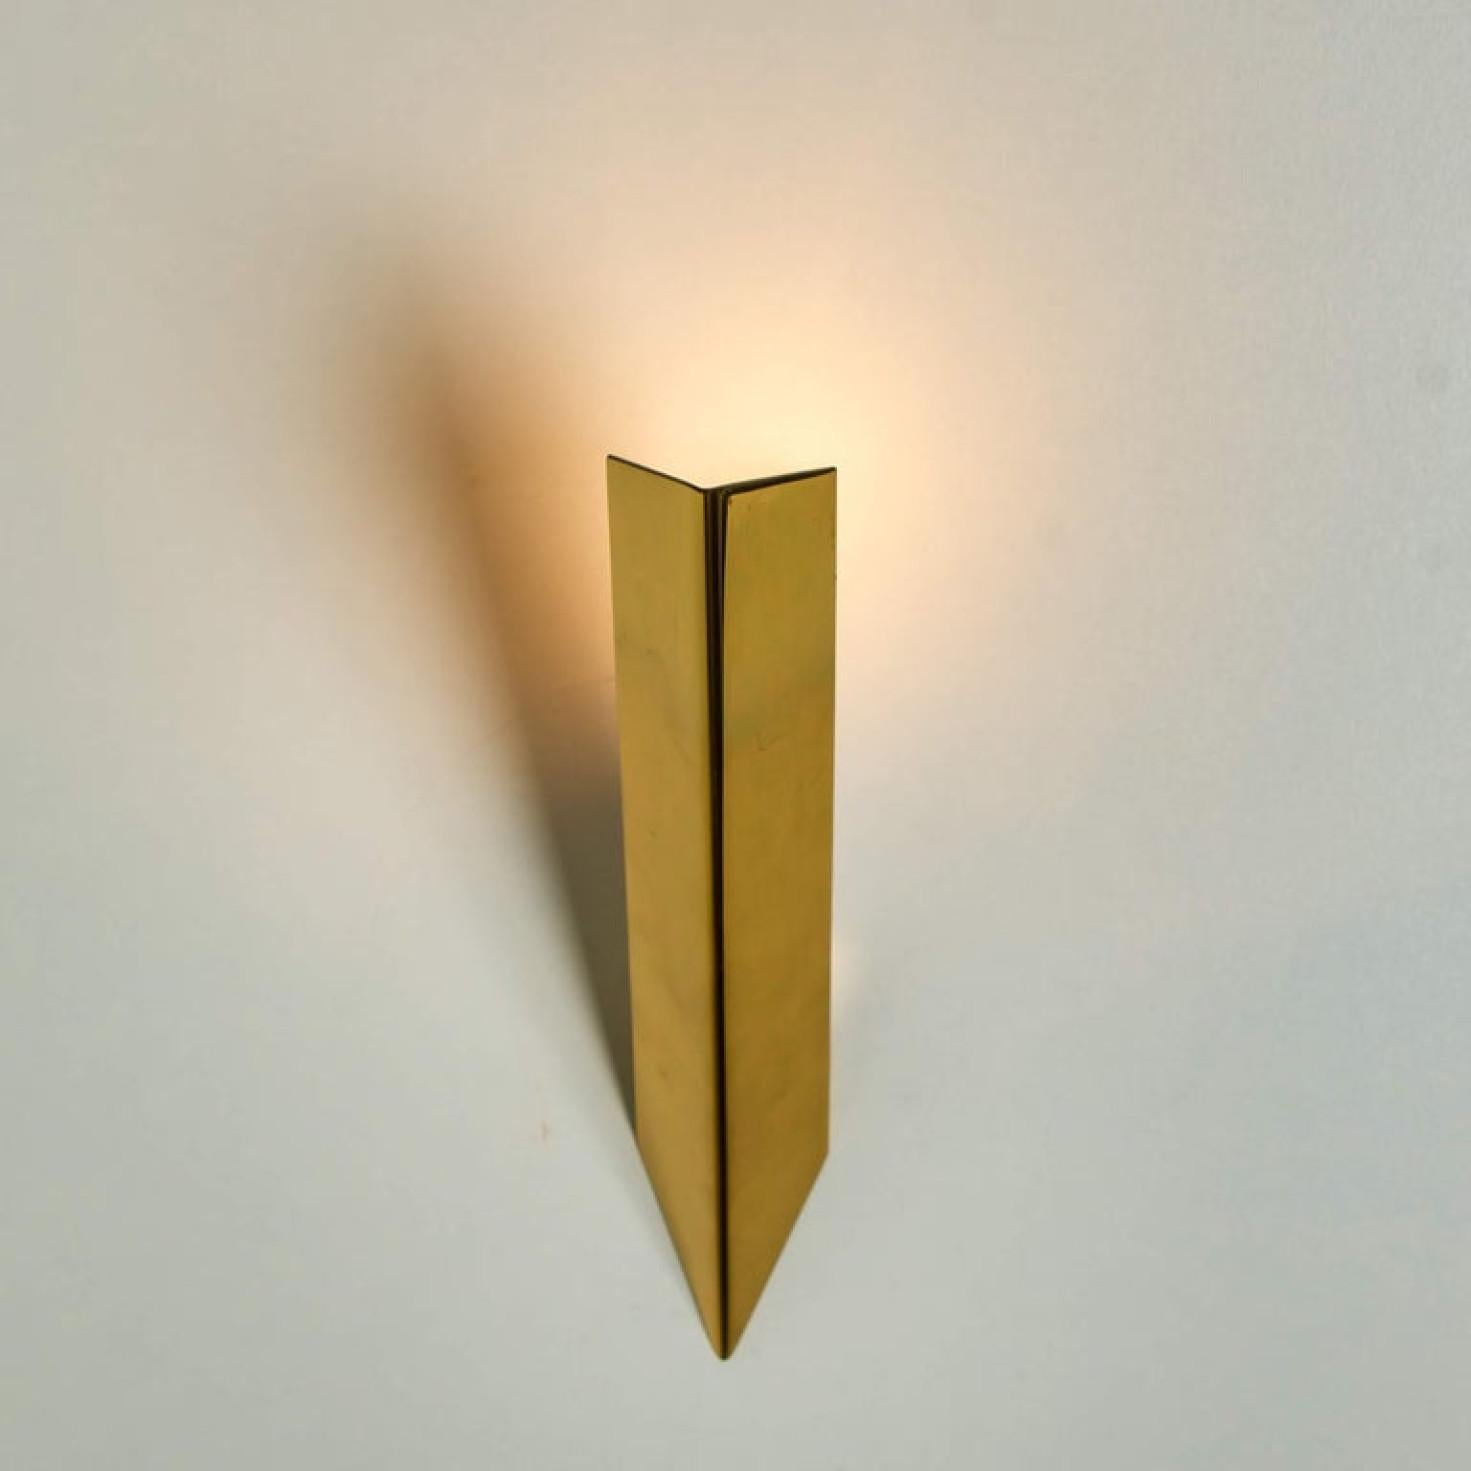 Pair of Wedge-Shaped High End Wall Lights by J.T. Kalmar, 1970s, Austria For Sale 1